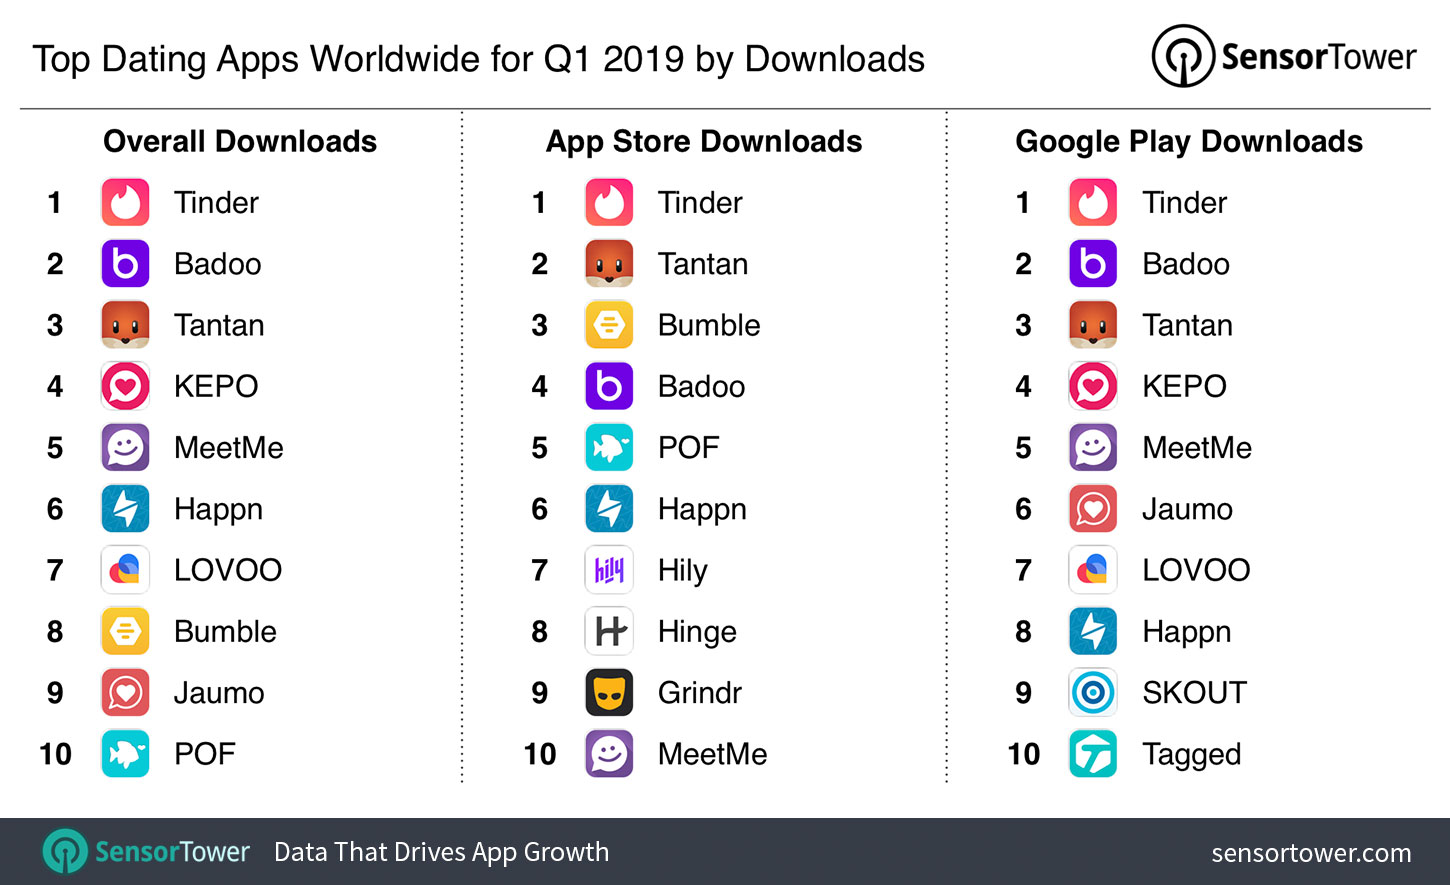 Top Dating Apps Worldwide for Q1 2019 by Downloads